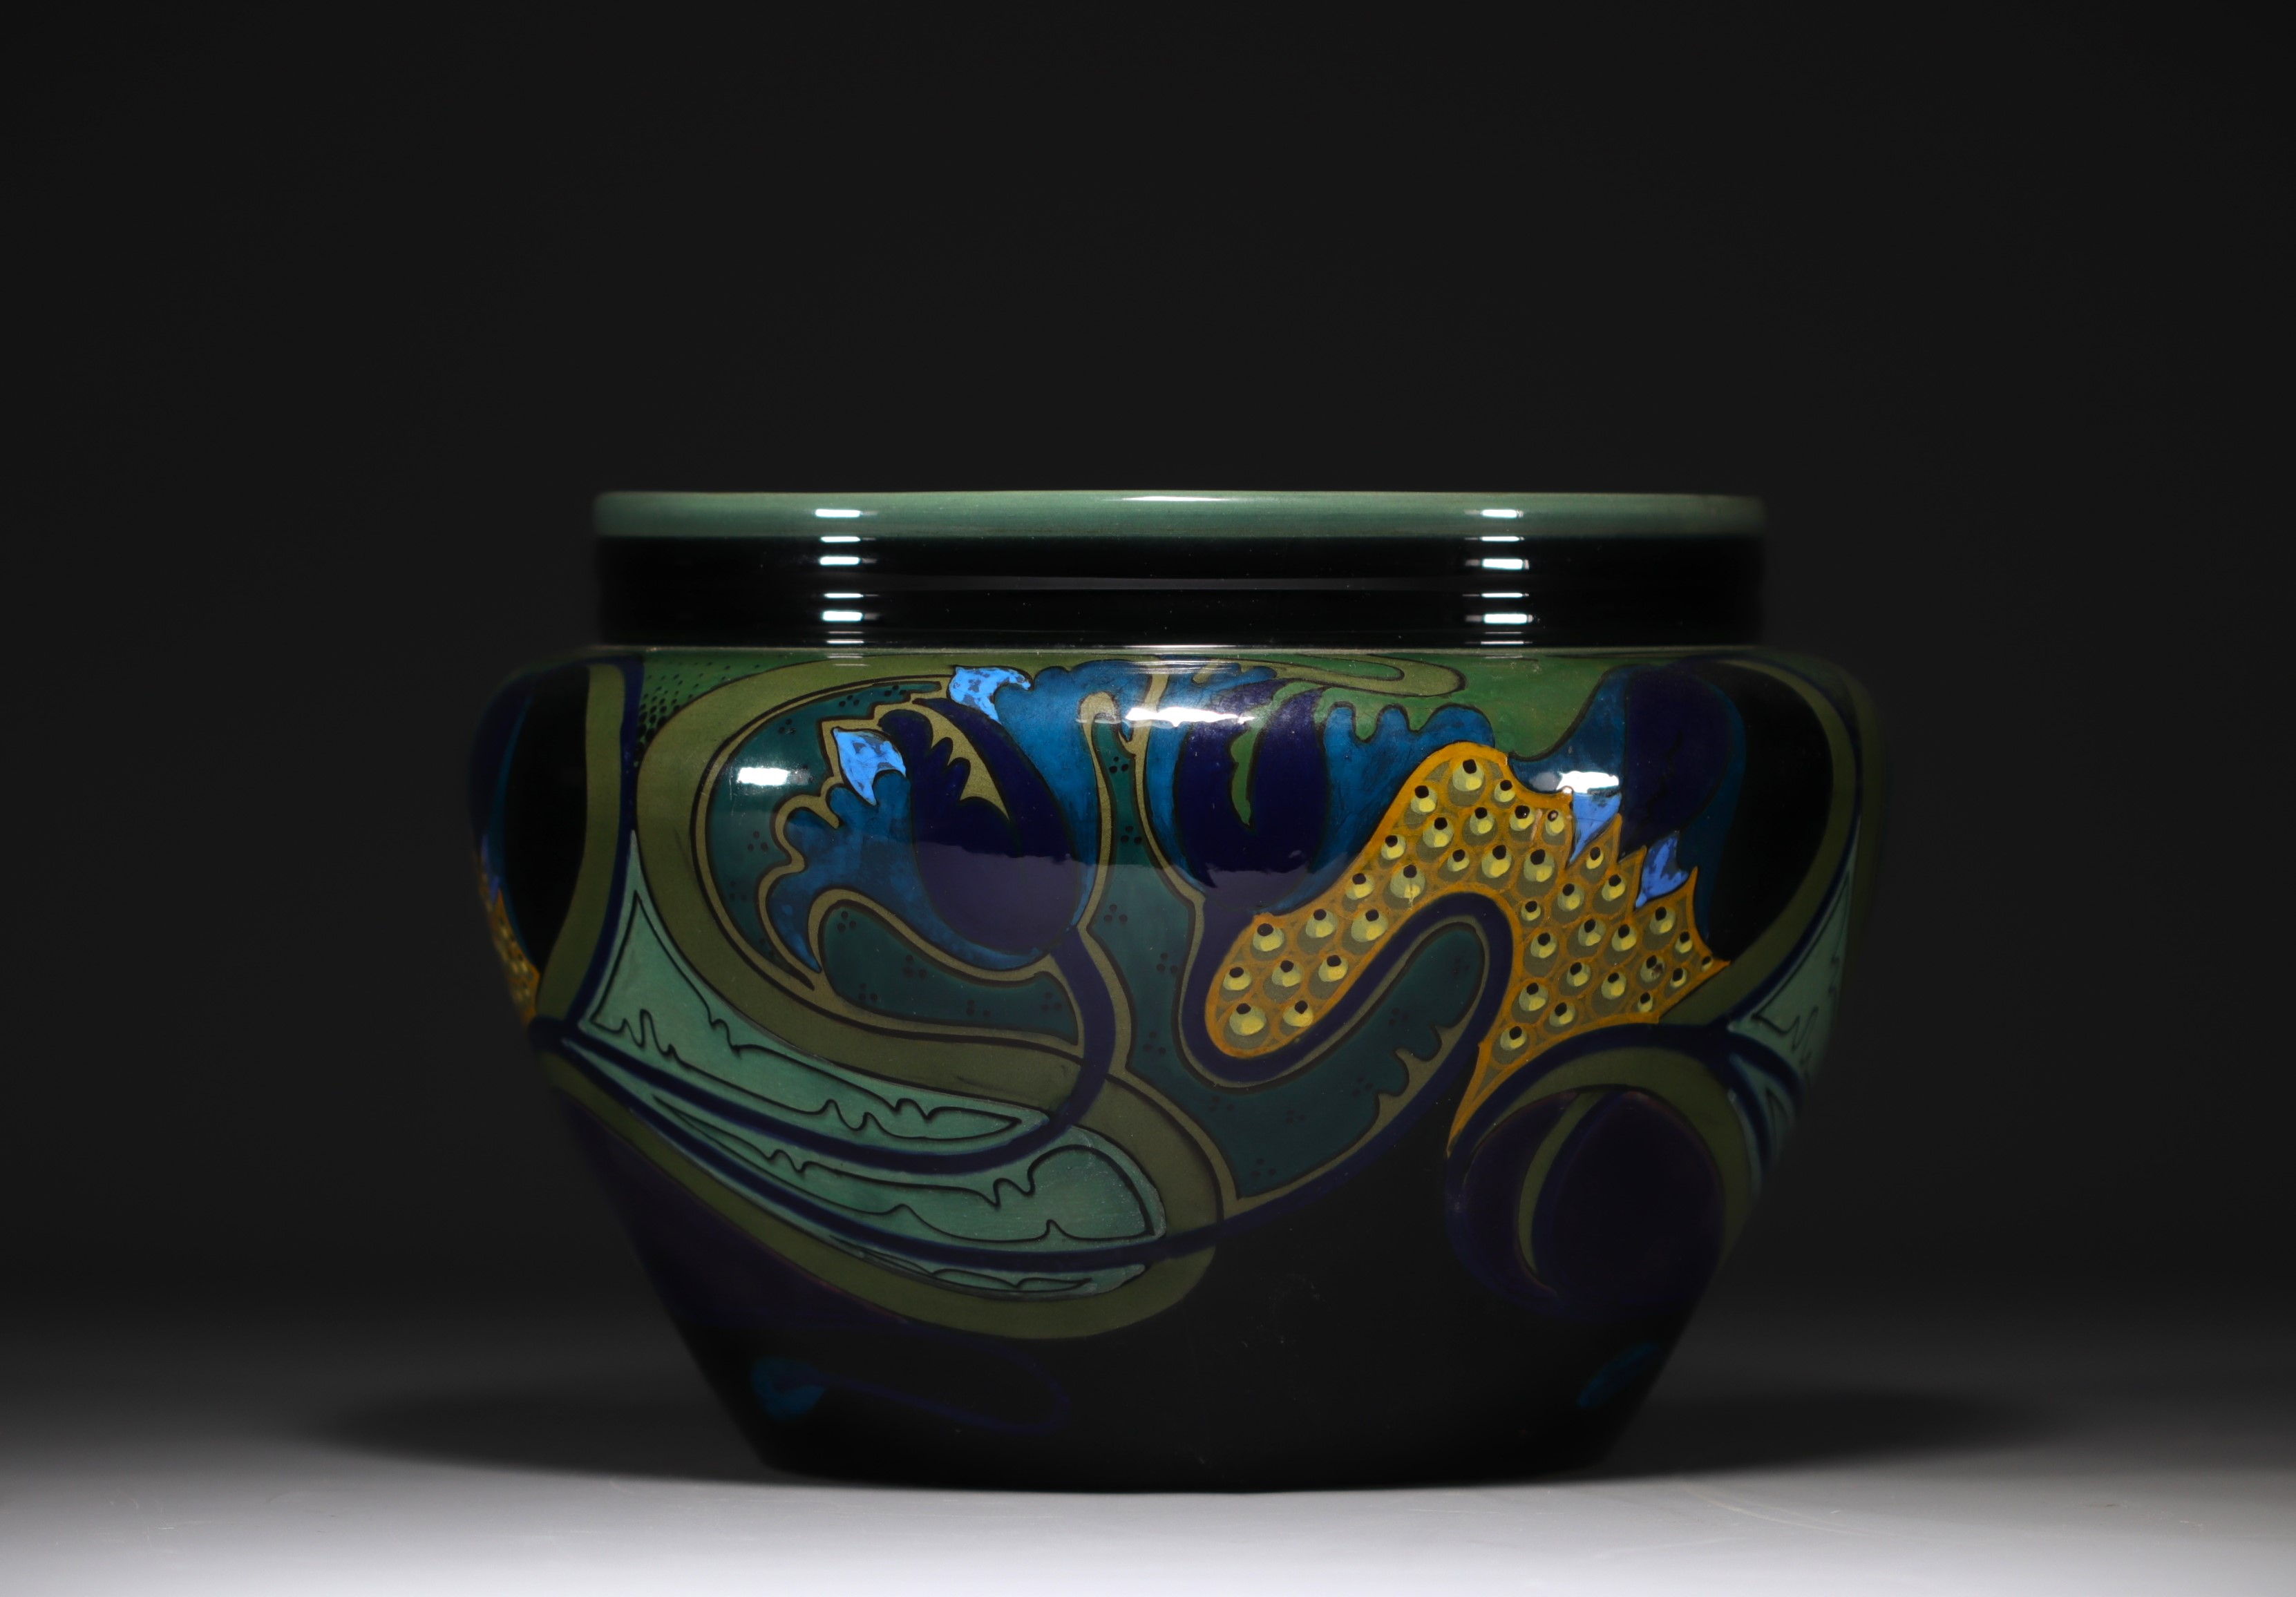 Art Nouveau ceramic vase or bowl from the Gouda factory in the Netherlands. - Image 4 of 6